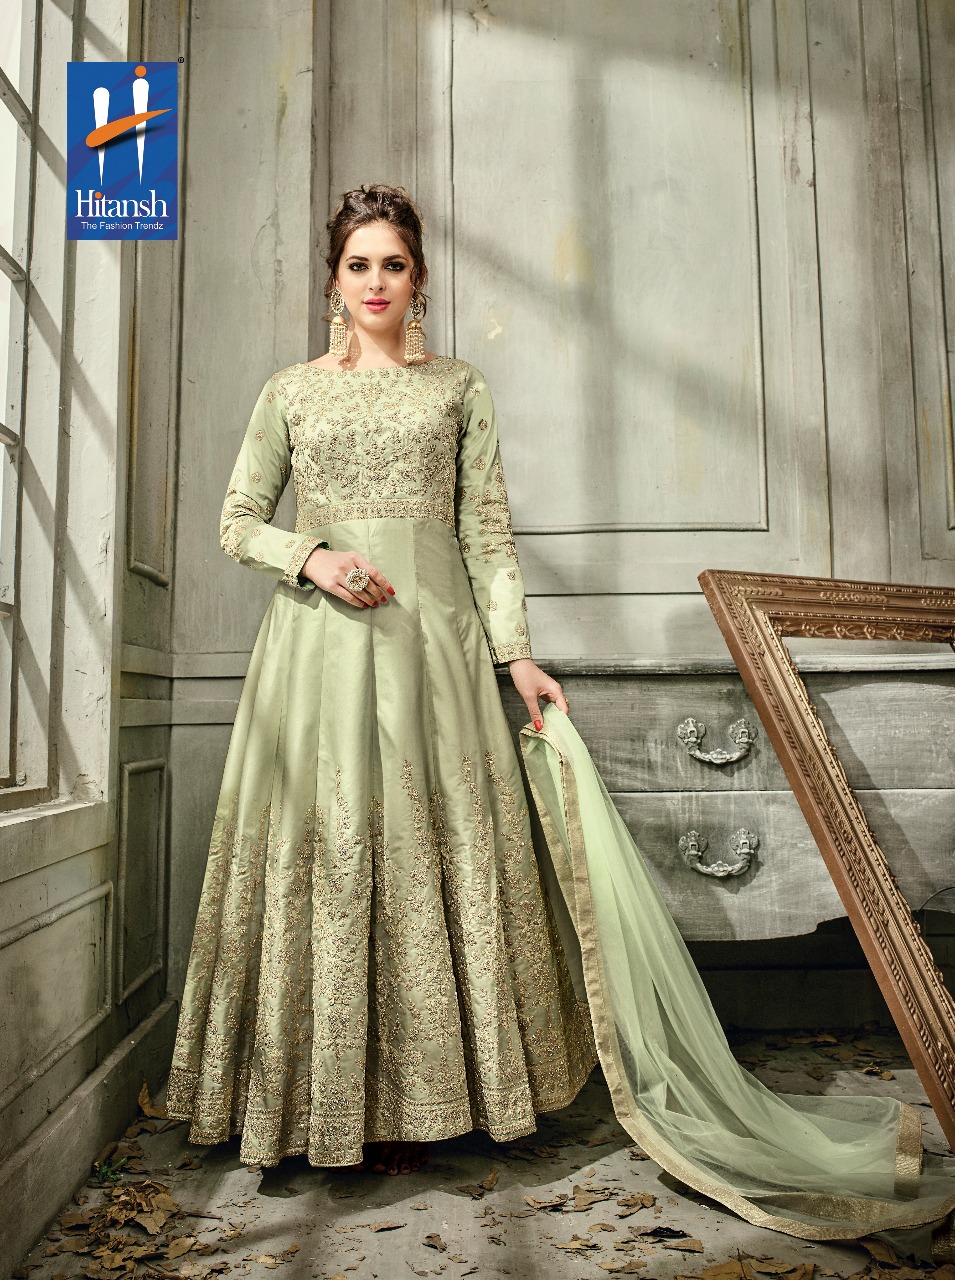 Ananya By Hitansh Fashion 1001 To 1010 Series Designer Wedding Collection Beautiful Fancy Colorful Stylish Party Wear & Occasional Wear Fancy Silk Dresses At Wholesale Price